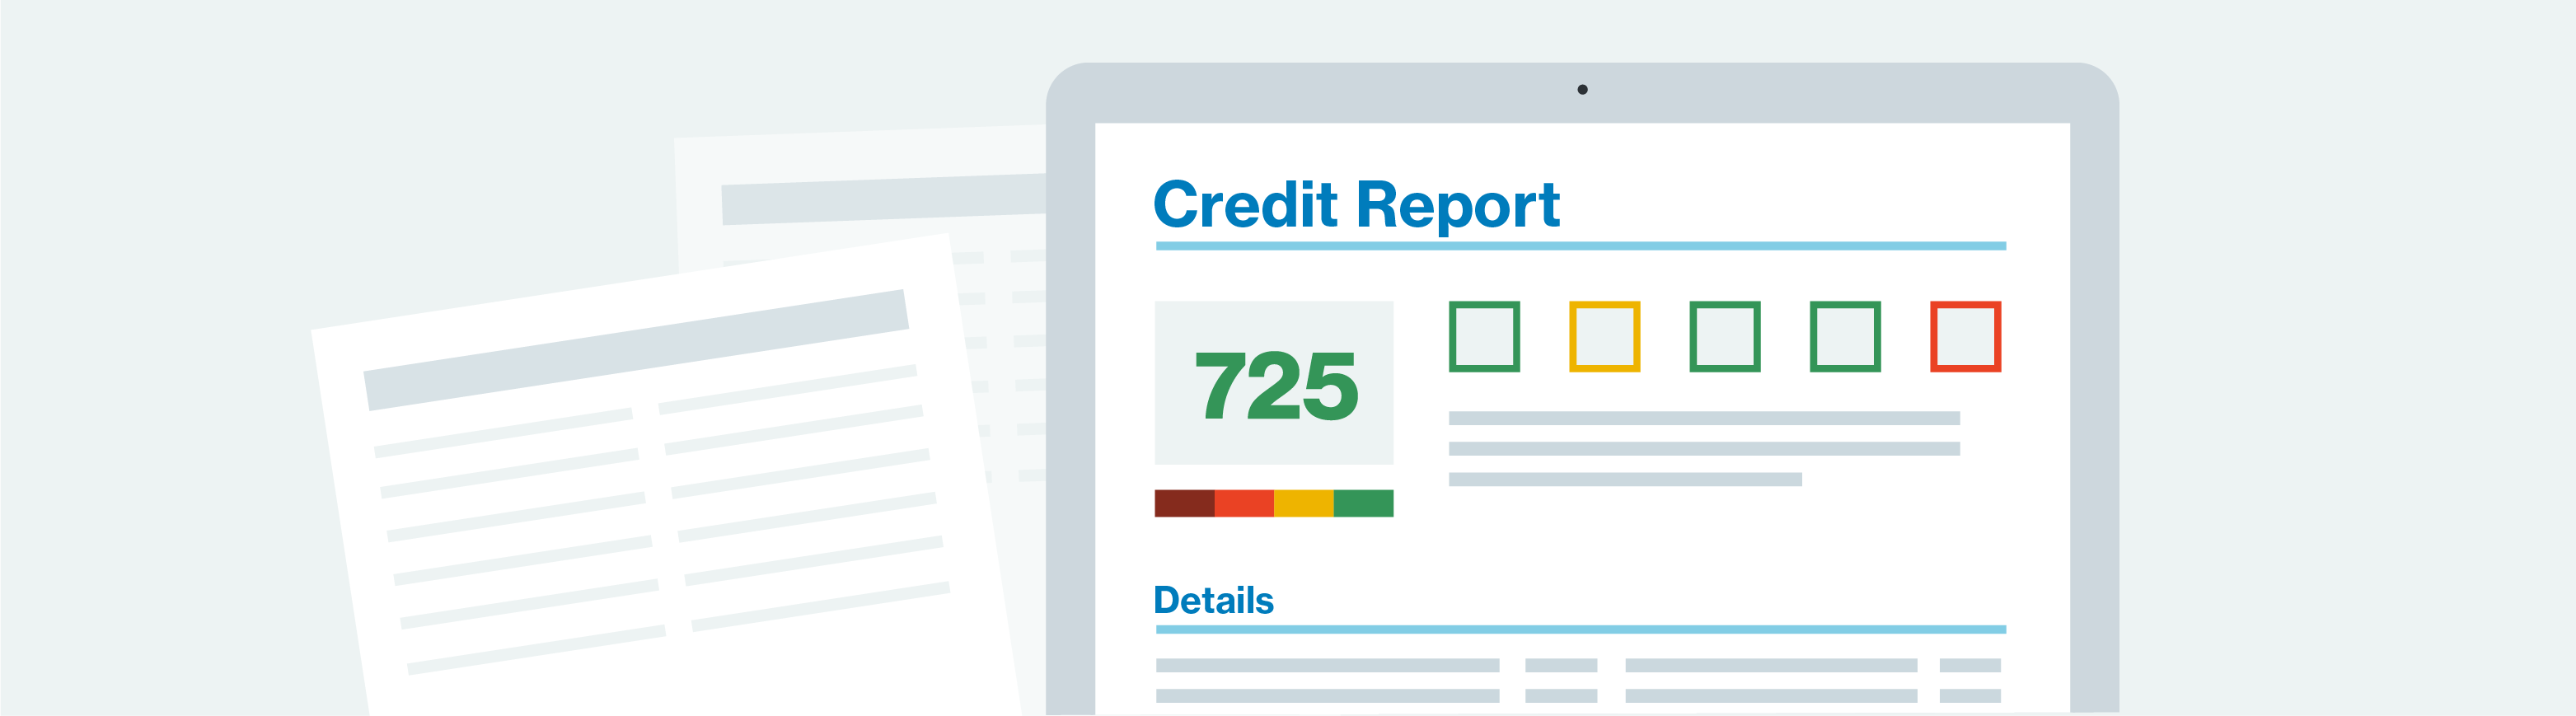 How to Read Your Credit Report: Red Flags and Errors You Should Dispute